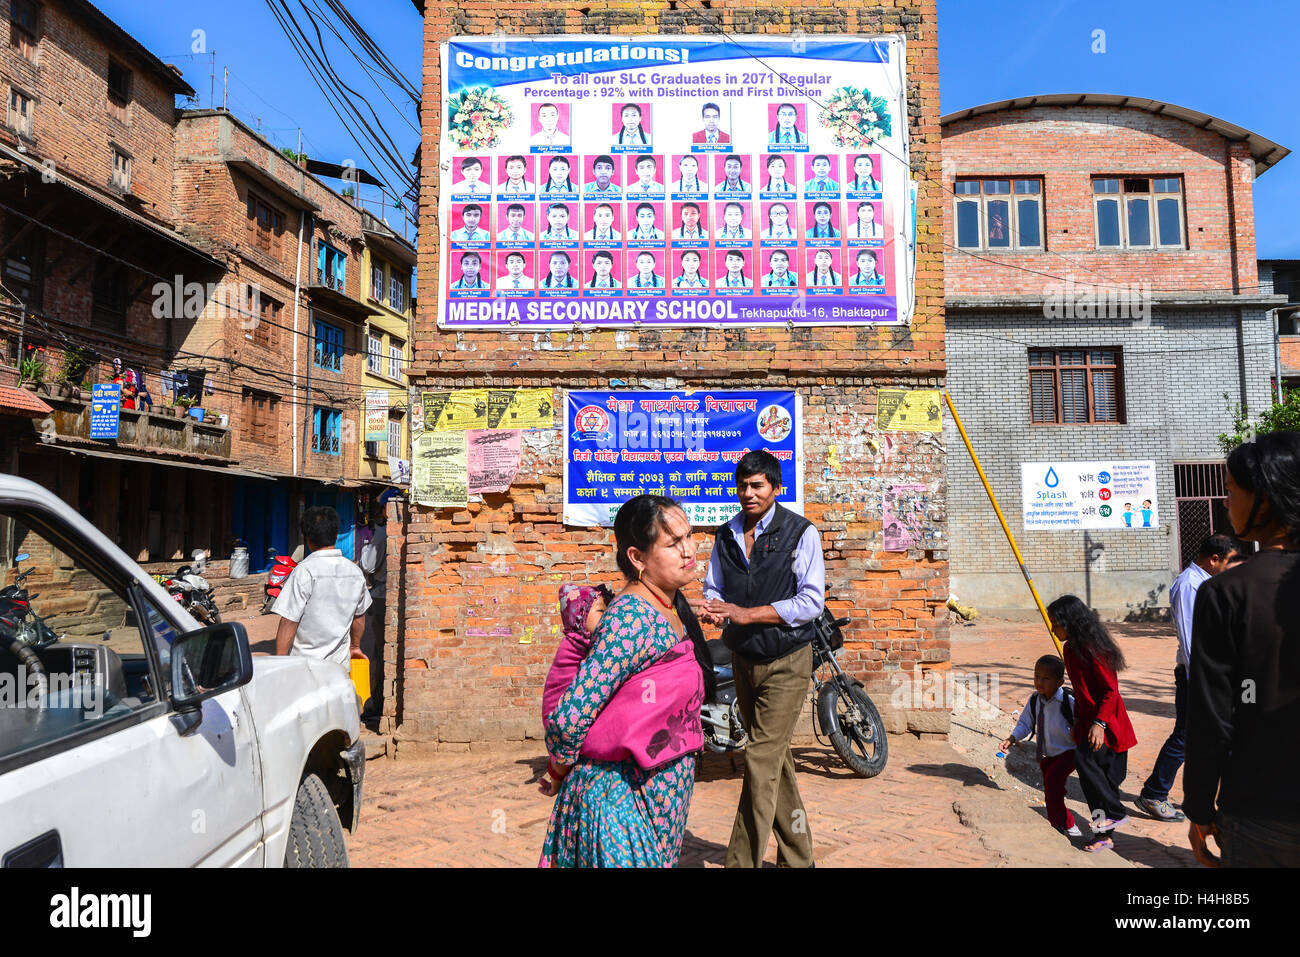 People standing in front of a secondary school building complex displaying graduation poster in the middle of residential area in Bhaktapur, Nepal. Stock Photo